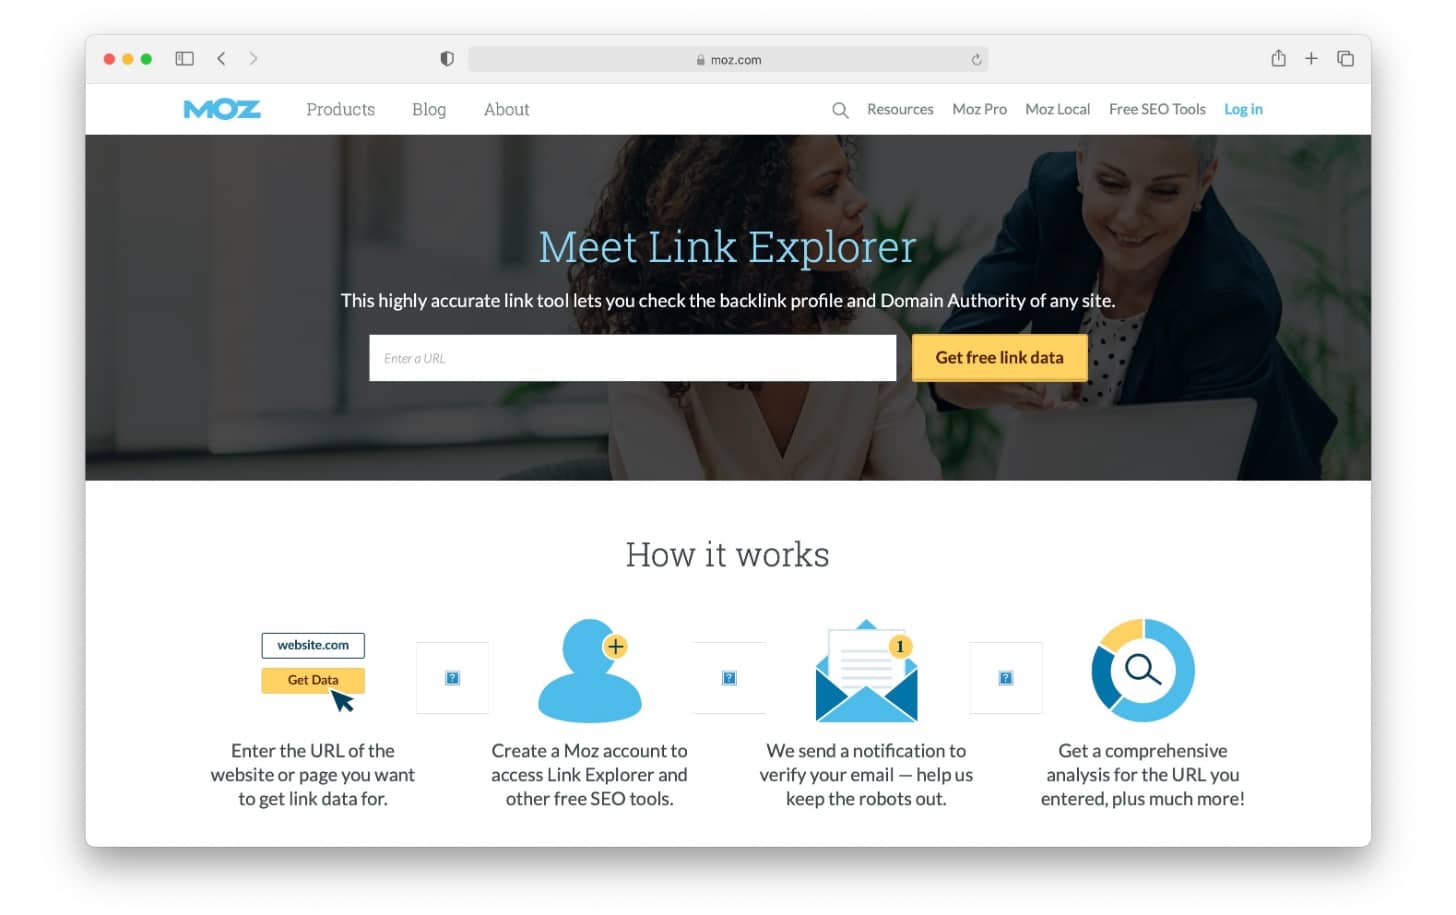 SEO tools like Moz Link Explorer help you track your competitors' backlinks and authority